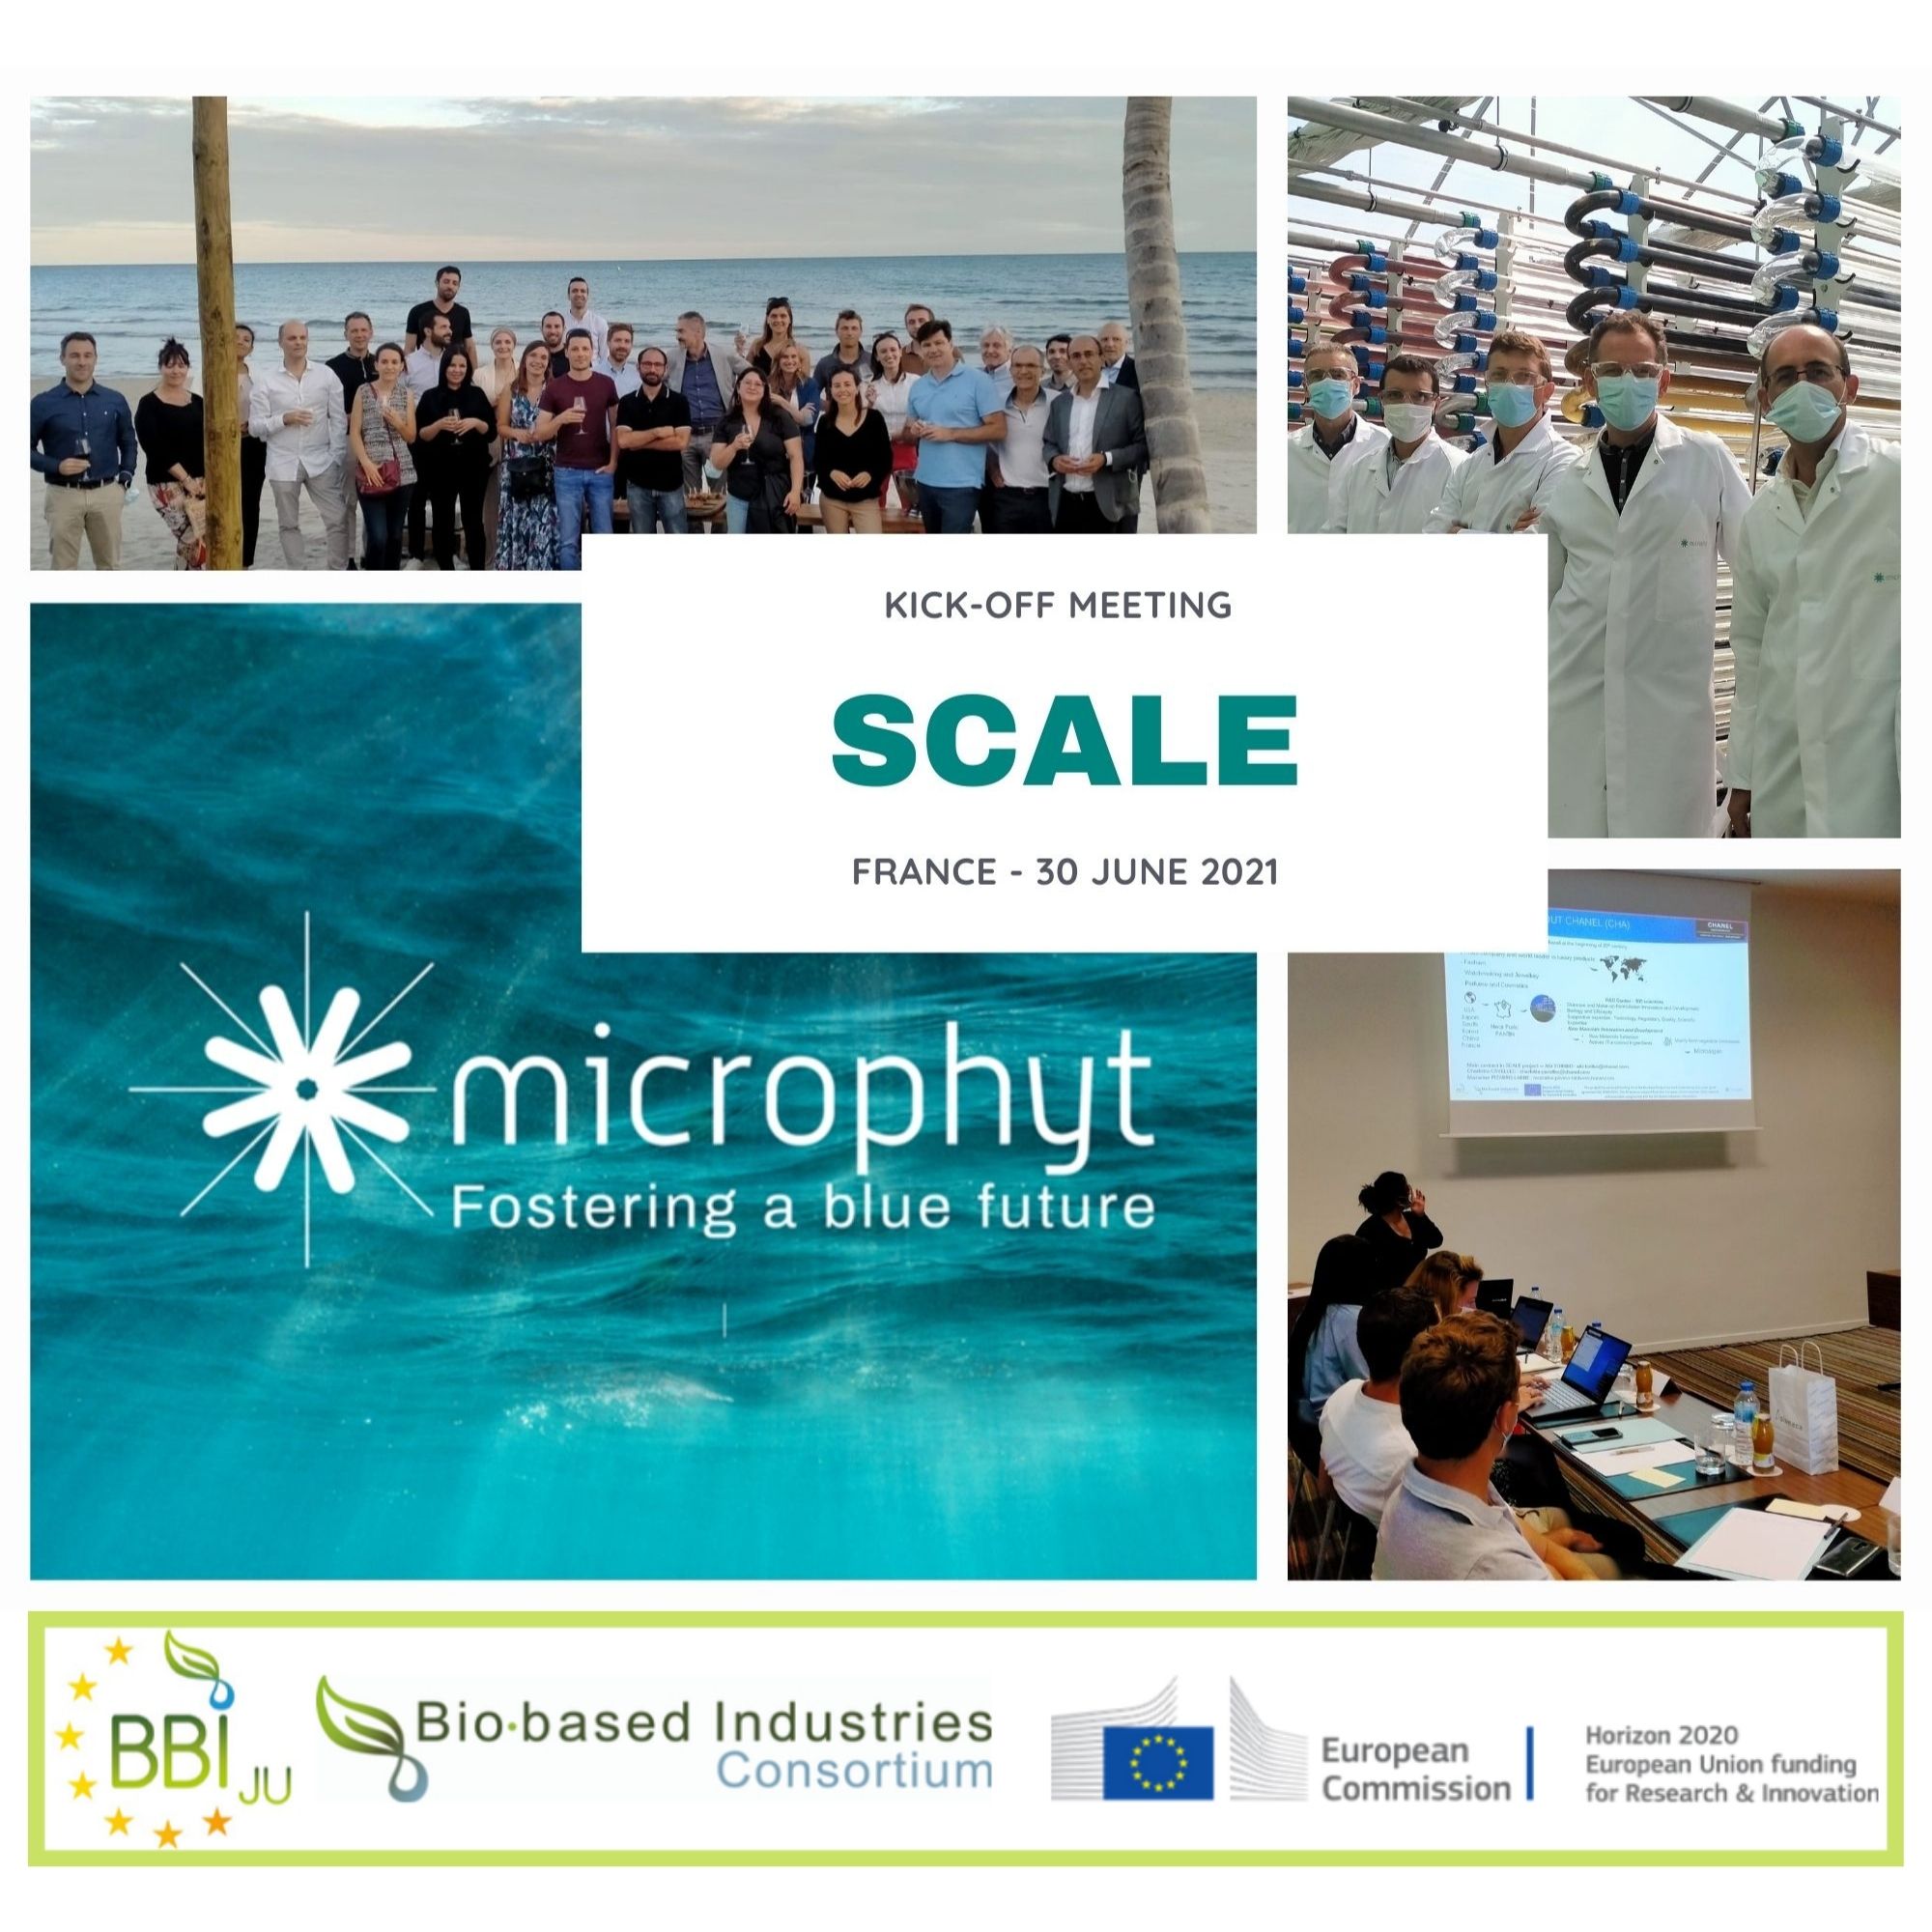 SCALE Kick-off meeting – 30 June Baillargues, France